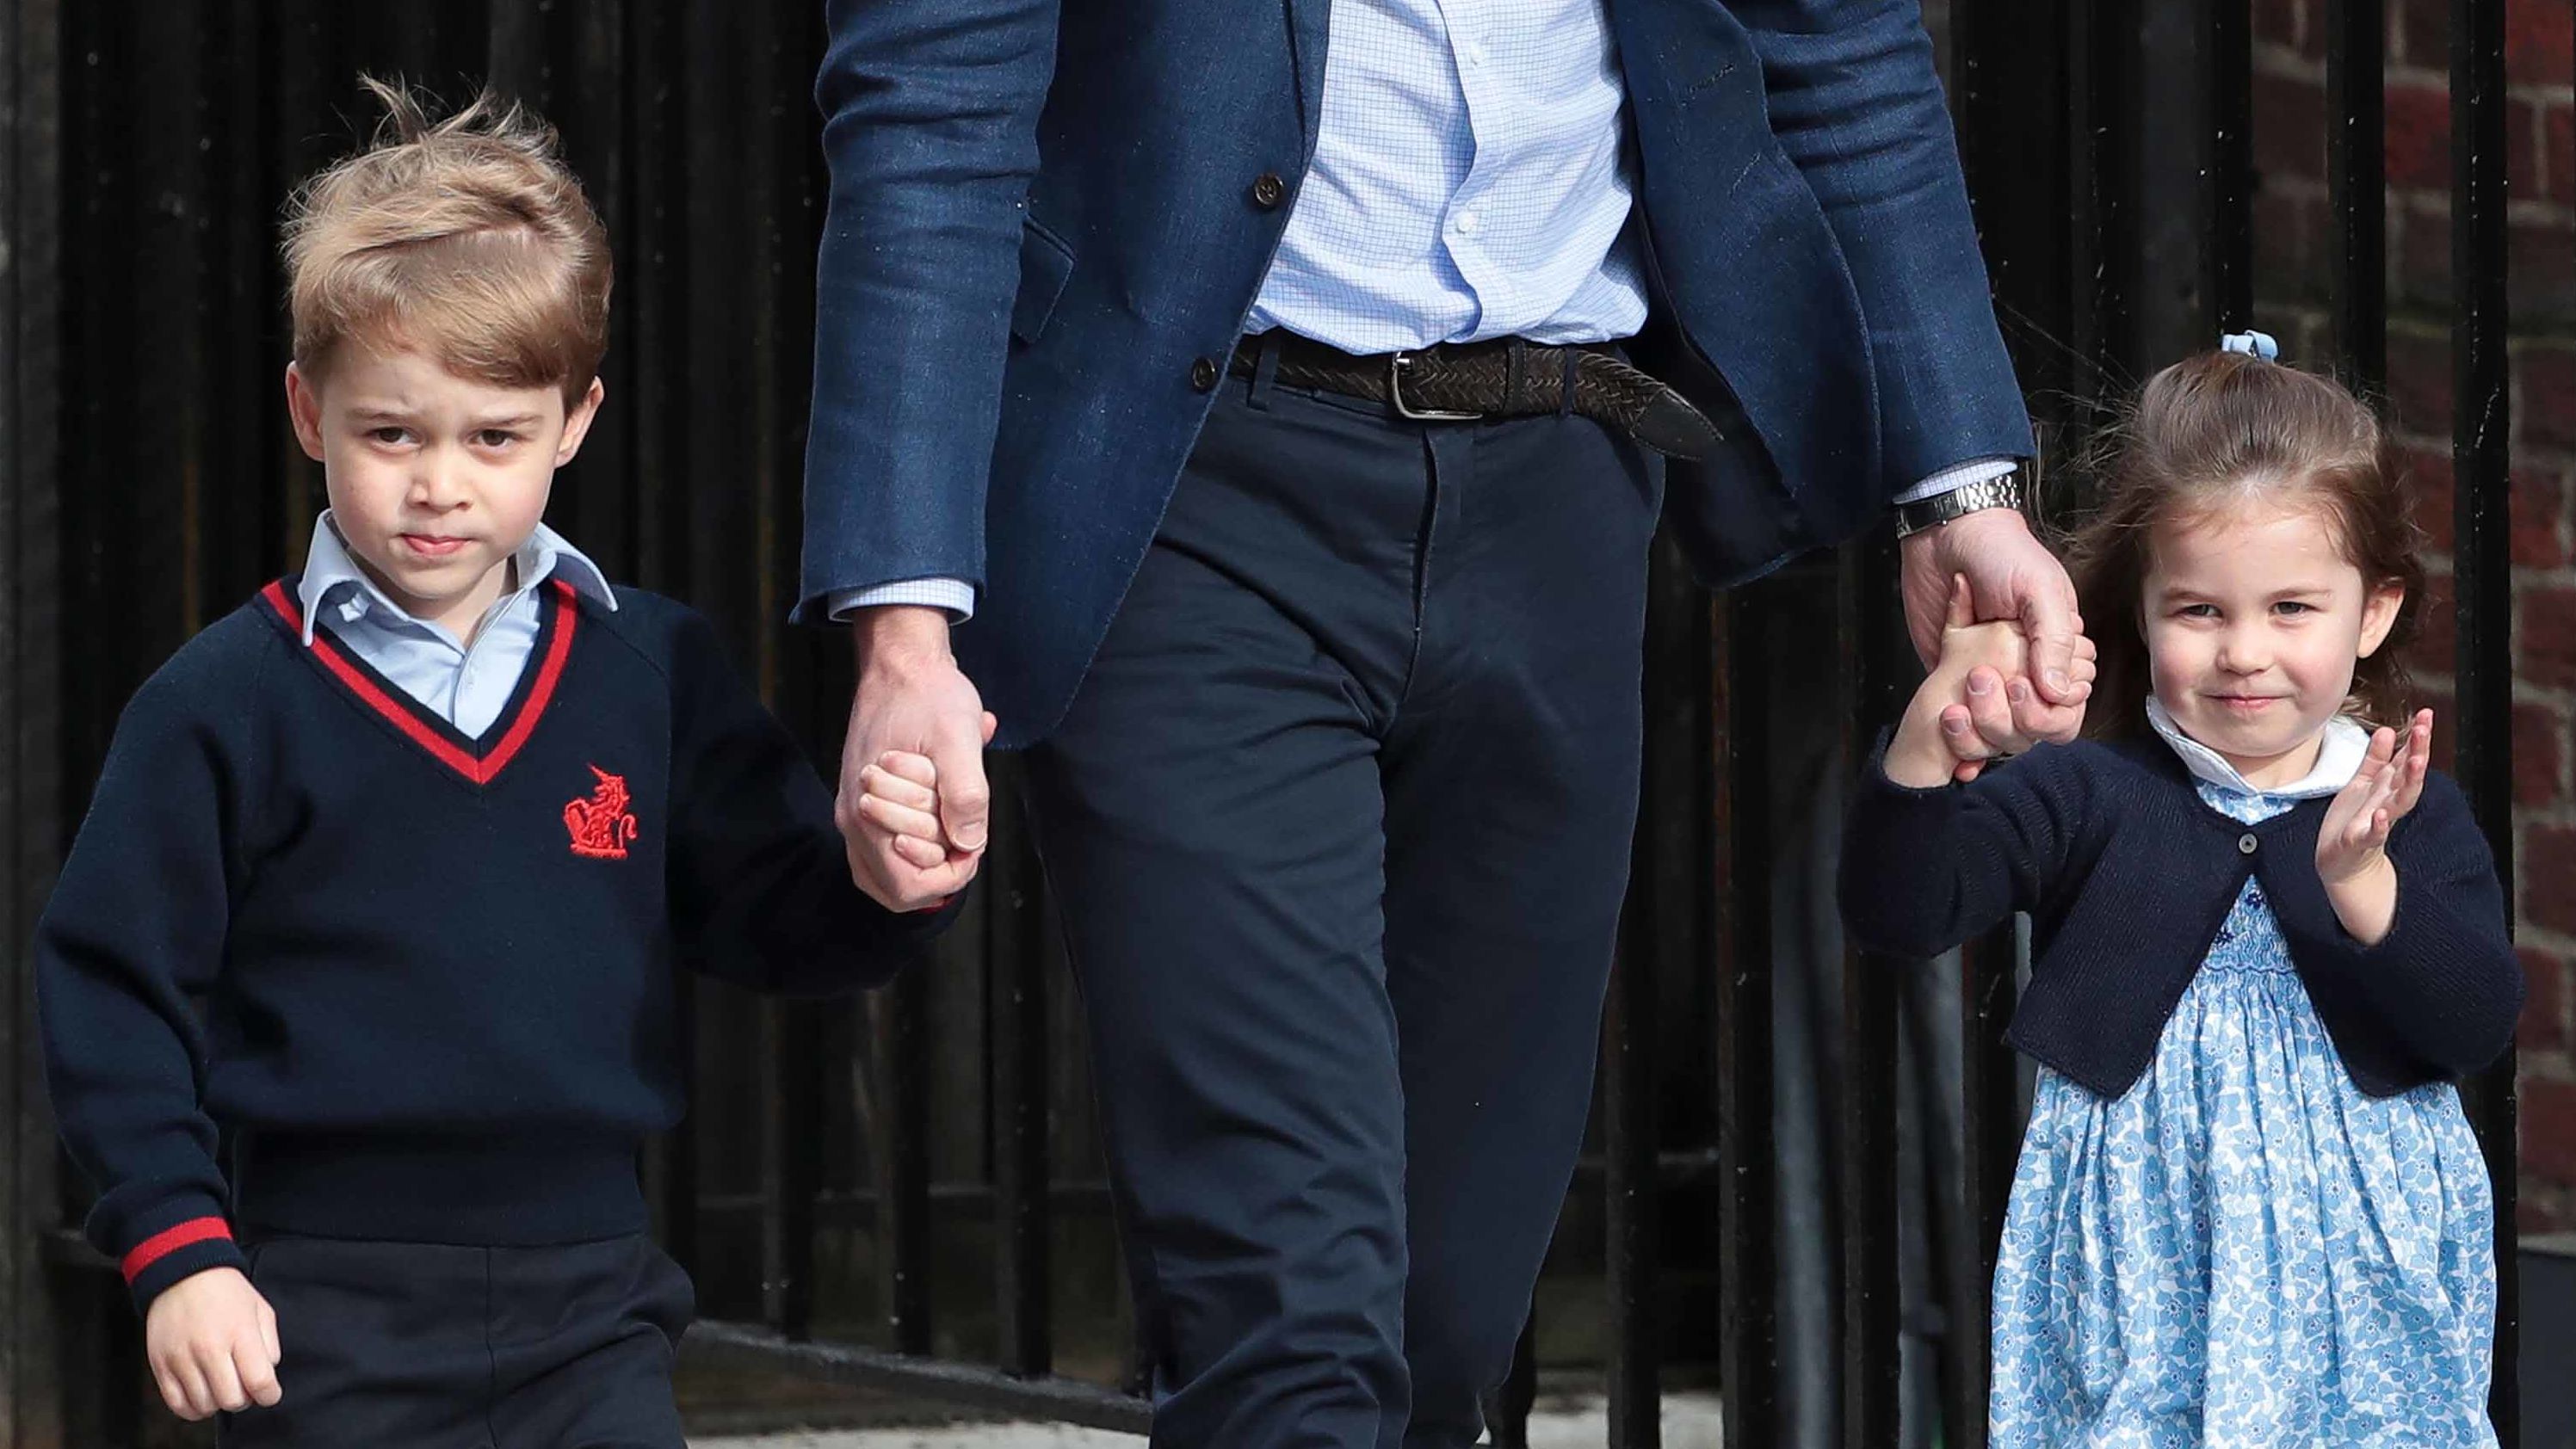 Prince William holds the hands of George and Charlotte as they visit the hospital to meet their new brother.